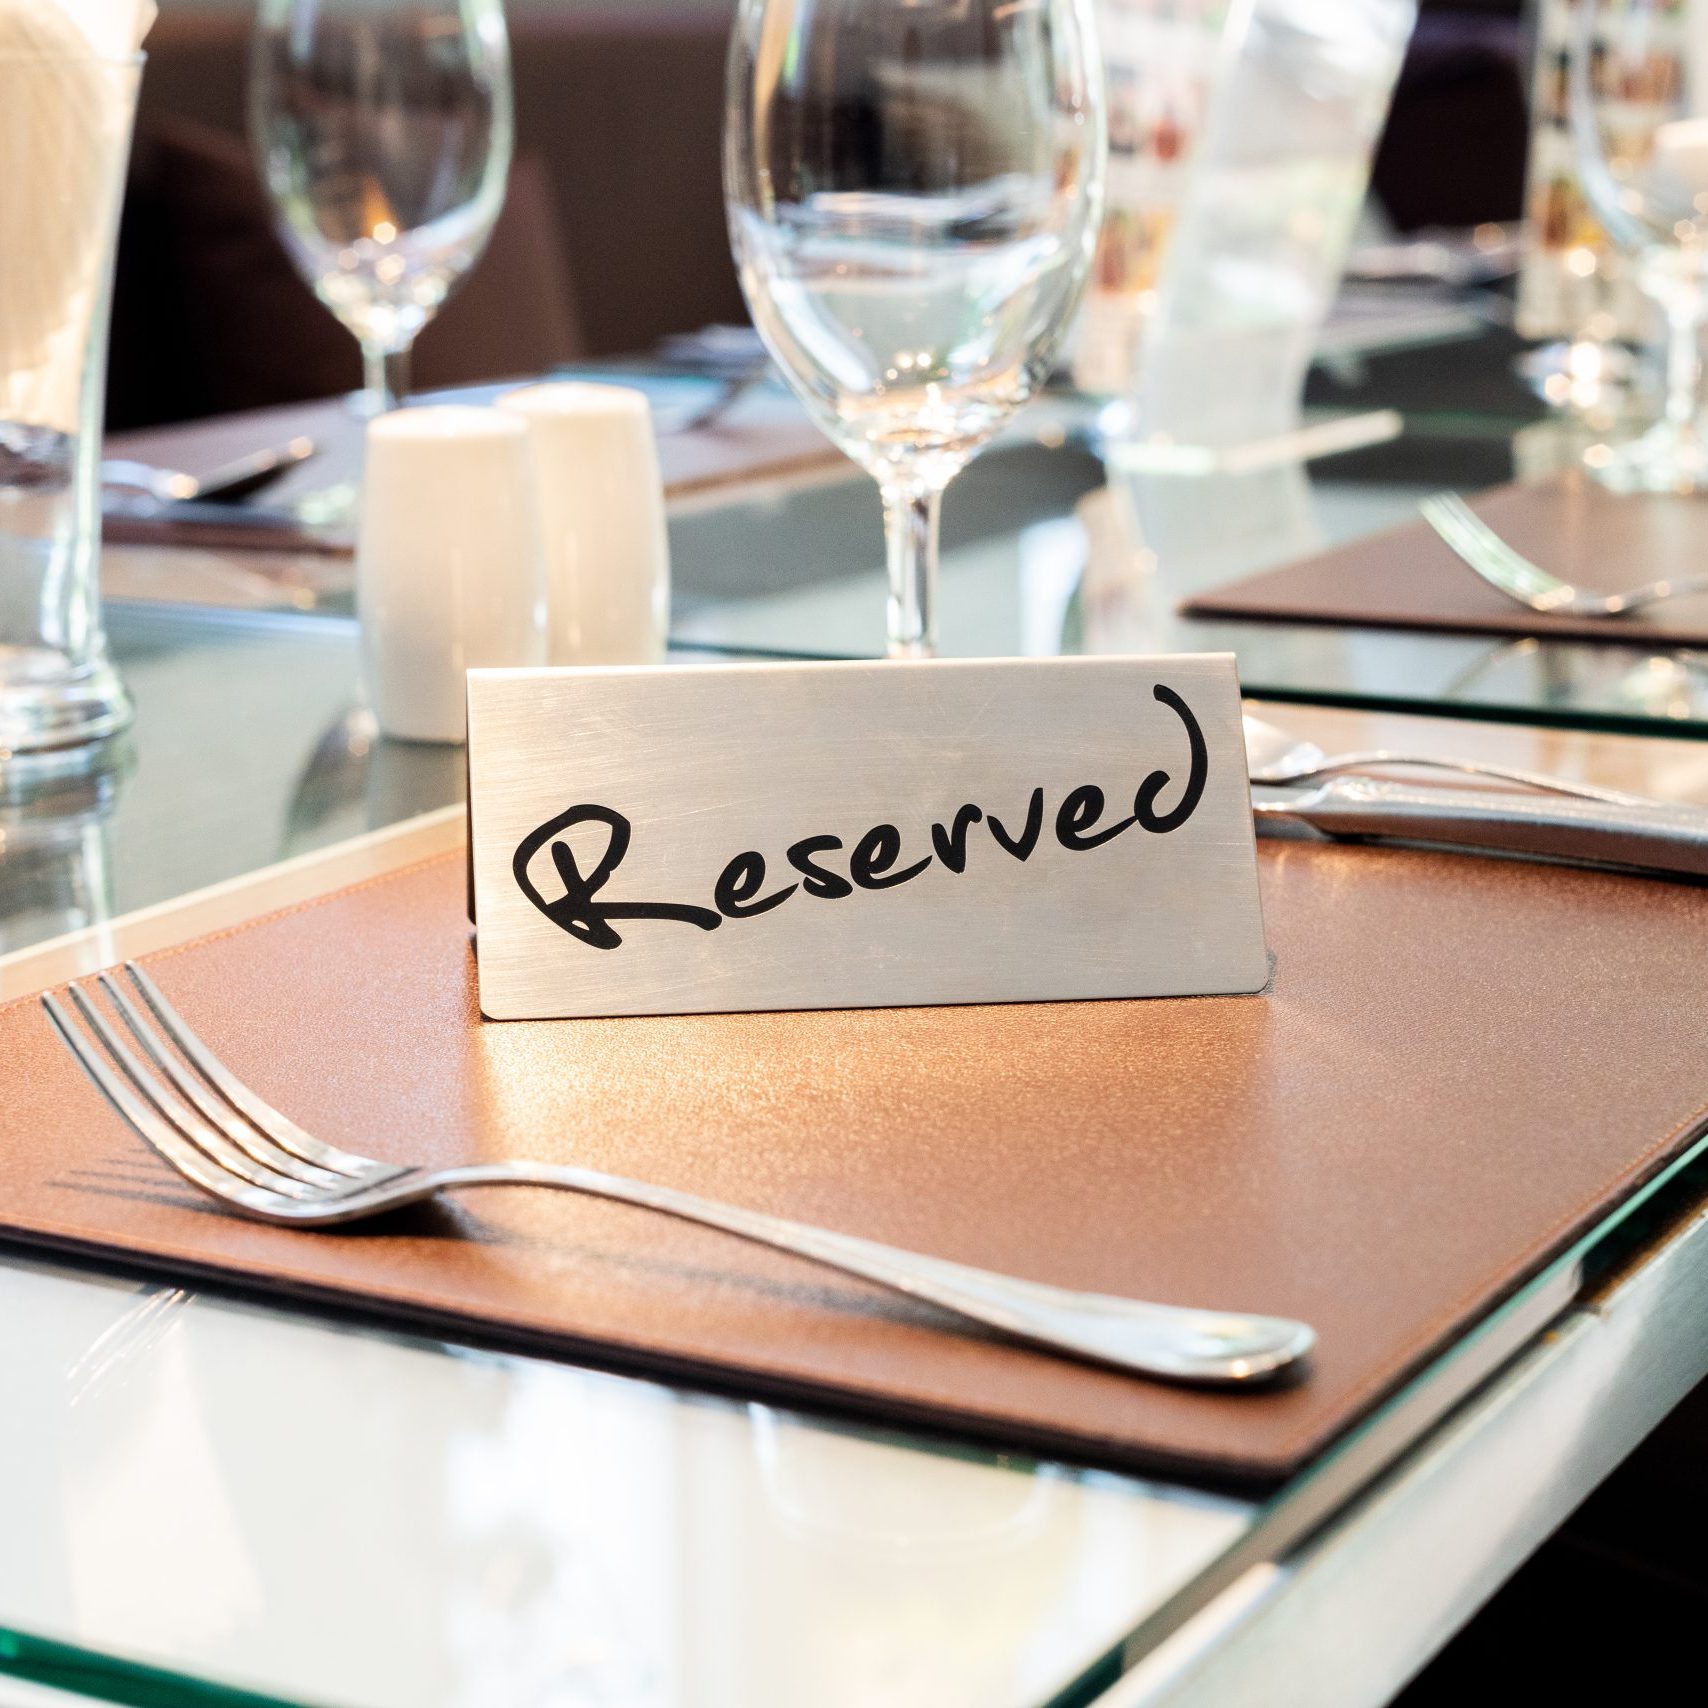 Reserved,Metal,Plate,On,The,Table,With,Blurry,Background.,Reservation